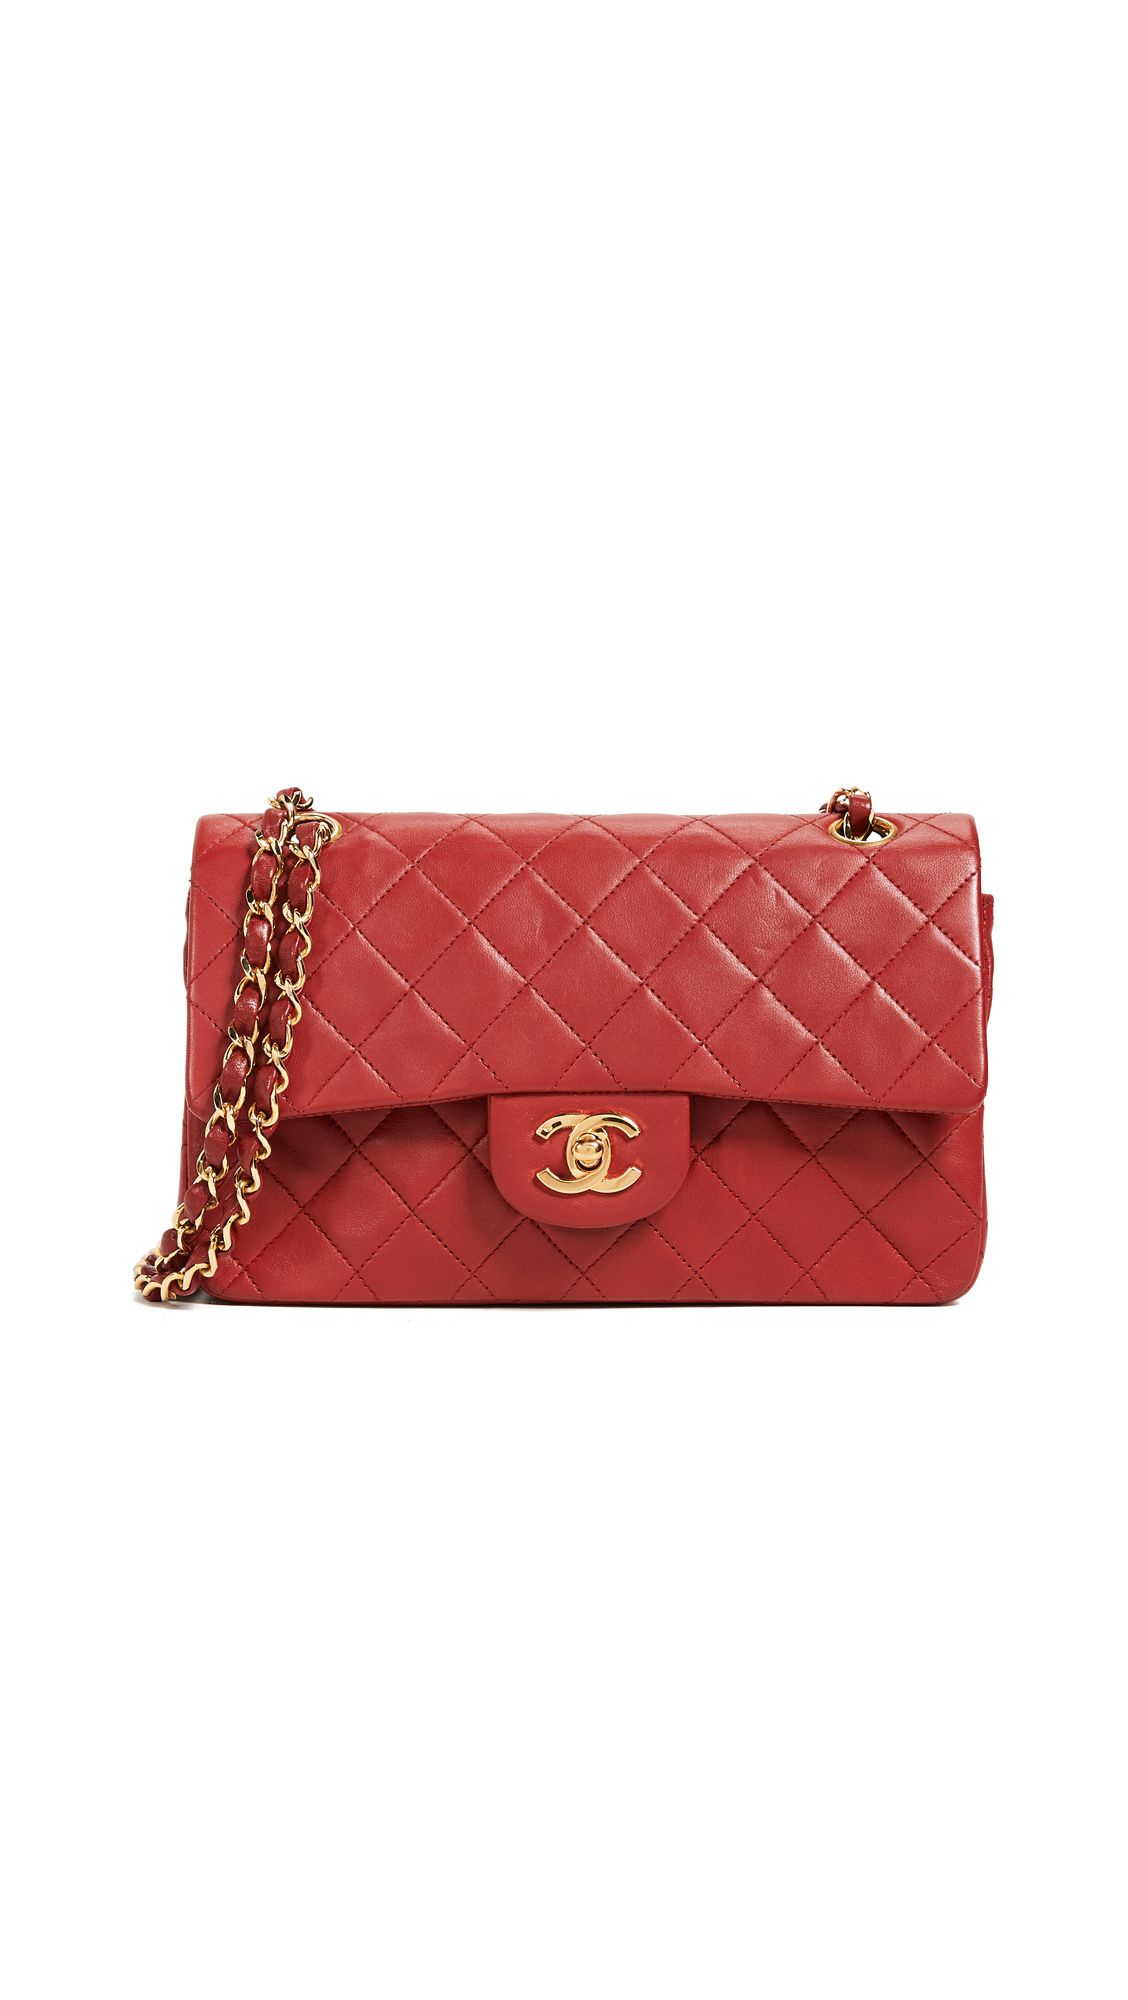 What Goes Around Comes Around Chanel Lambskin Classic Flap Bag | Shopbop